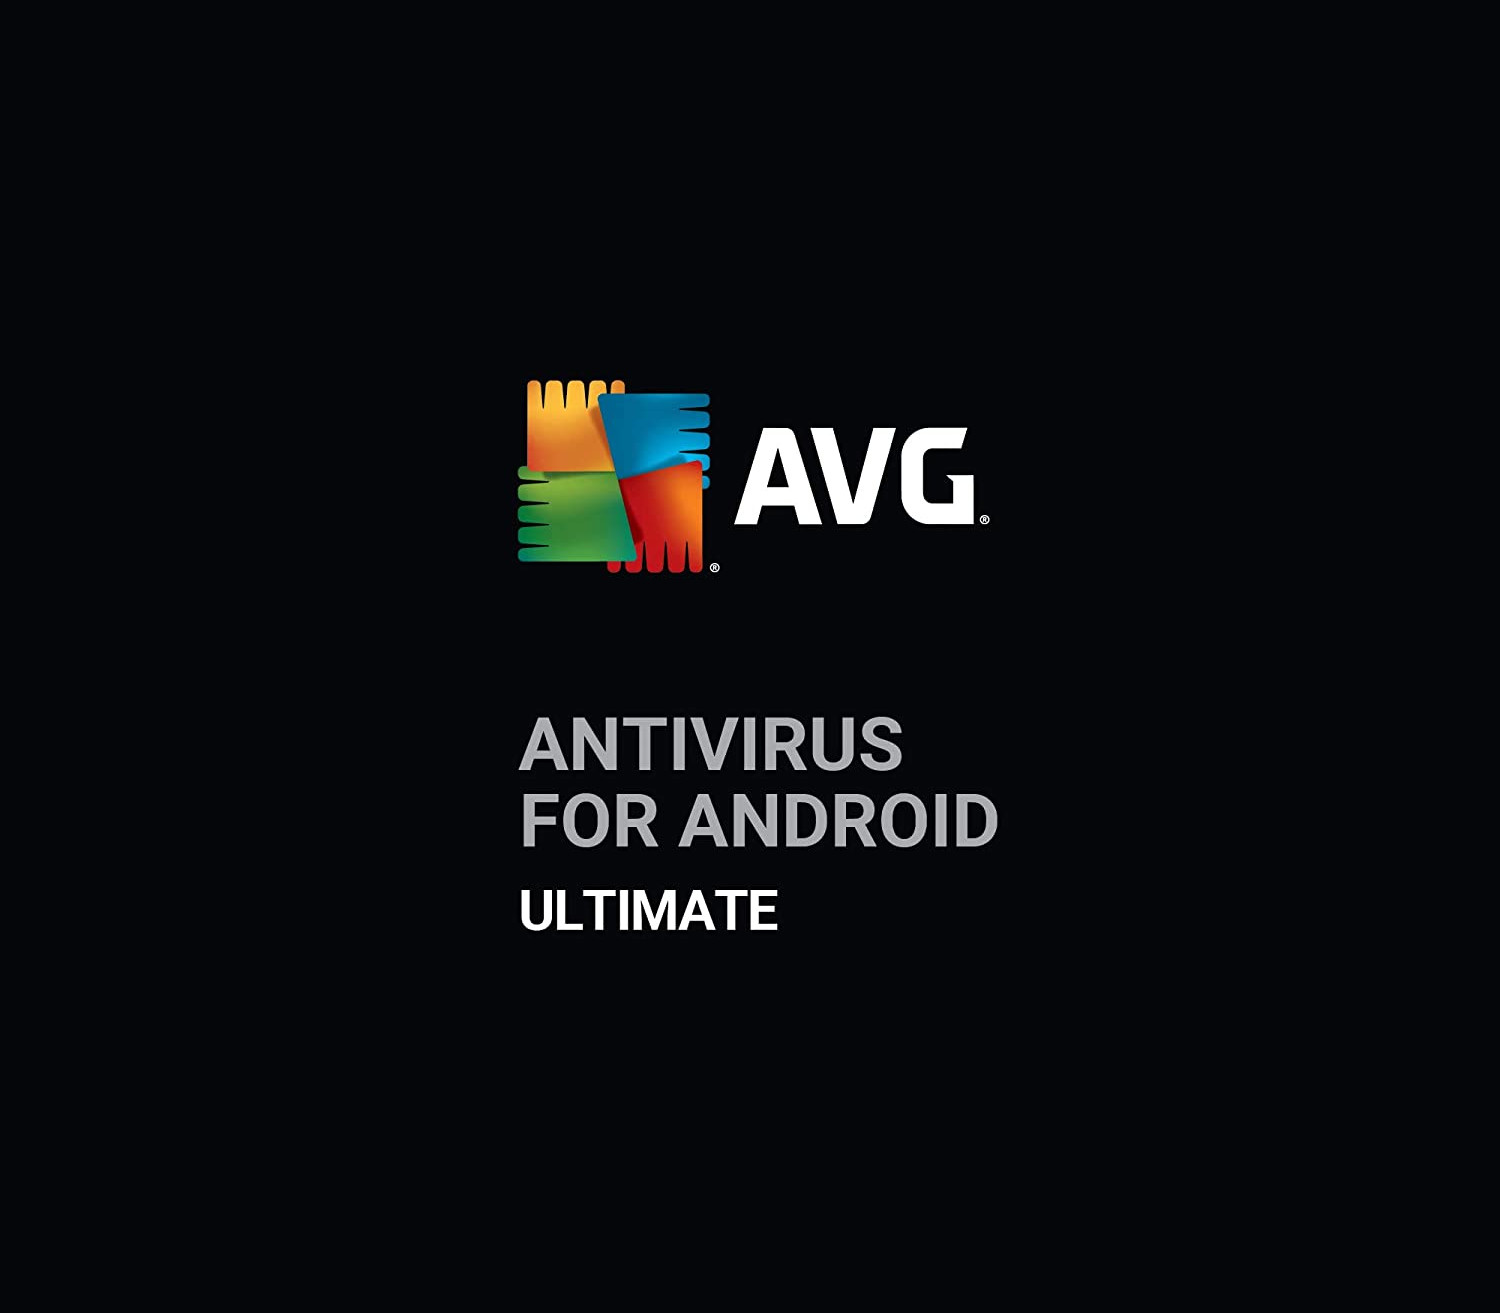 AVG Antivirus for Android - Ultimate Key (1 Year / 1 Device) [USD 6.84]